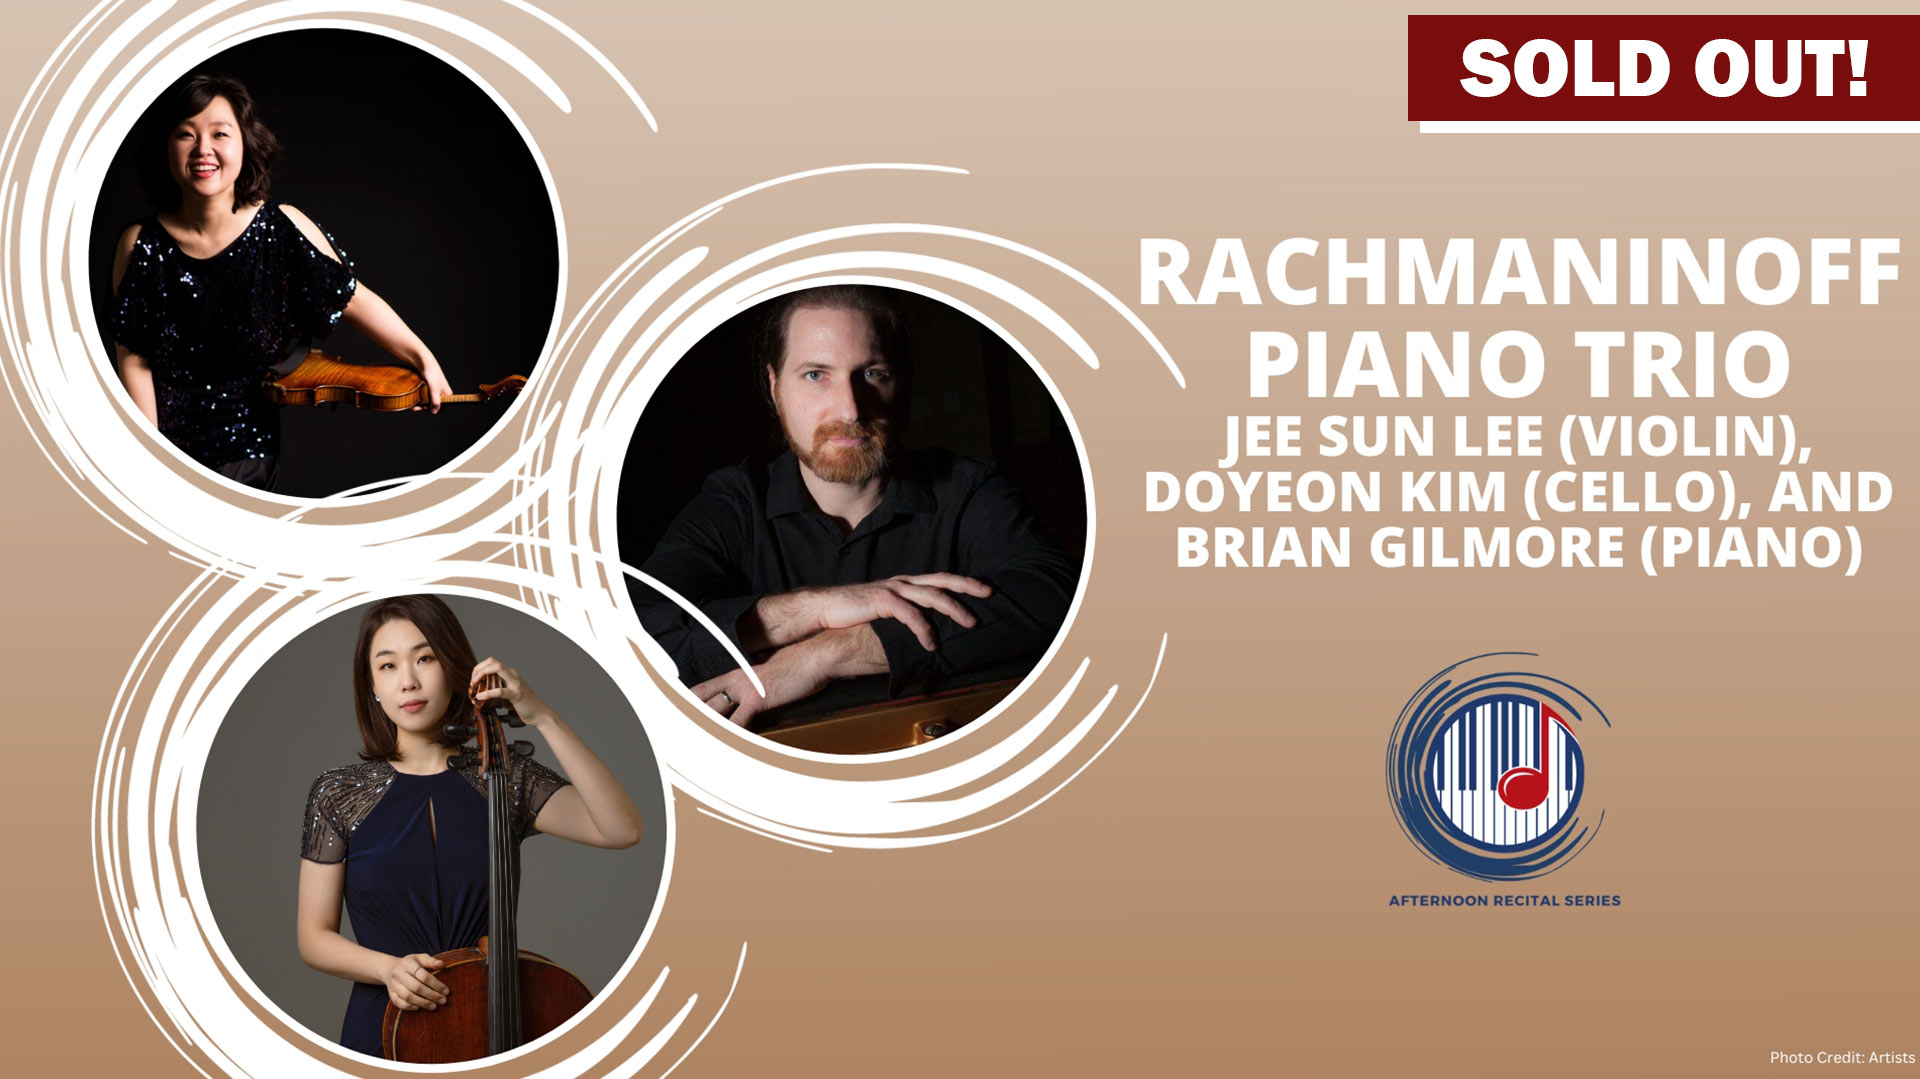 Rachmaninoff Trio - Sold Out